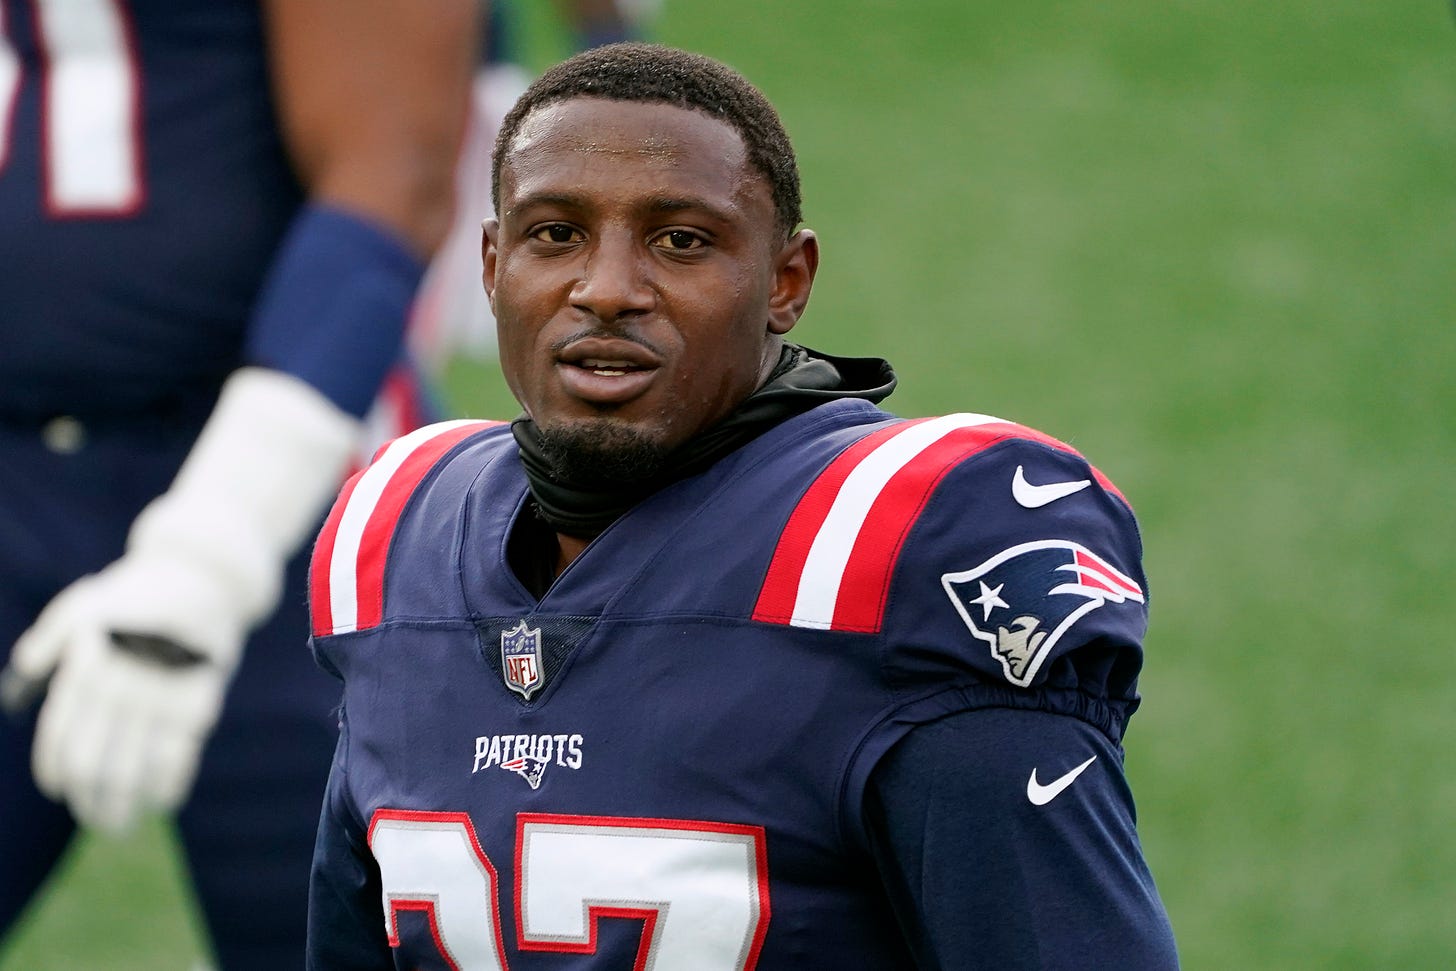 Patriots&amp;#39; J.C. Jackson reacts to Pro Bowl snub, praise from other top CBs:  &amp;#39;If you know, you know&amp;#39; - masslive.com